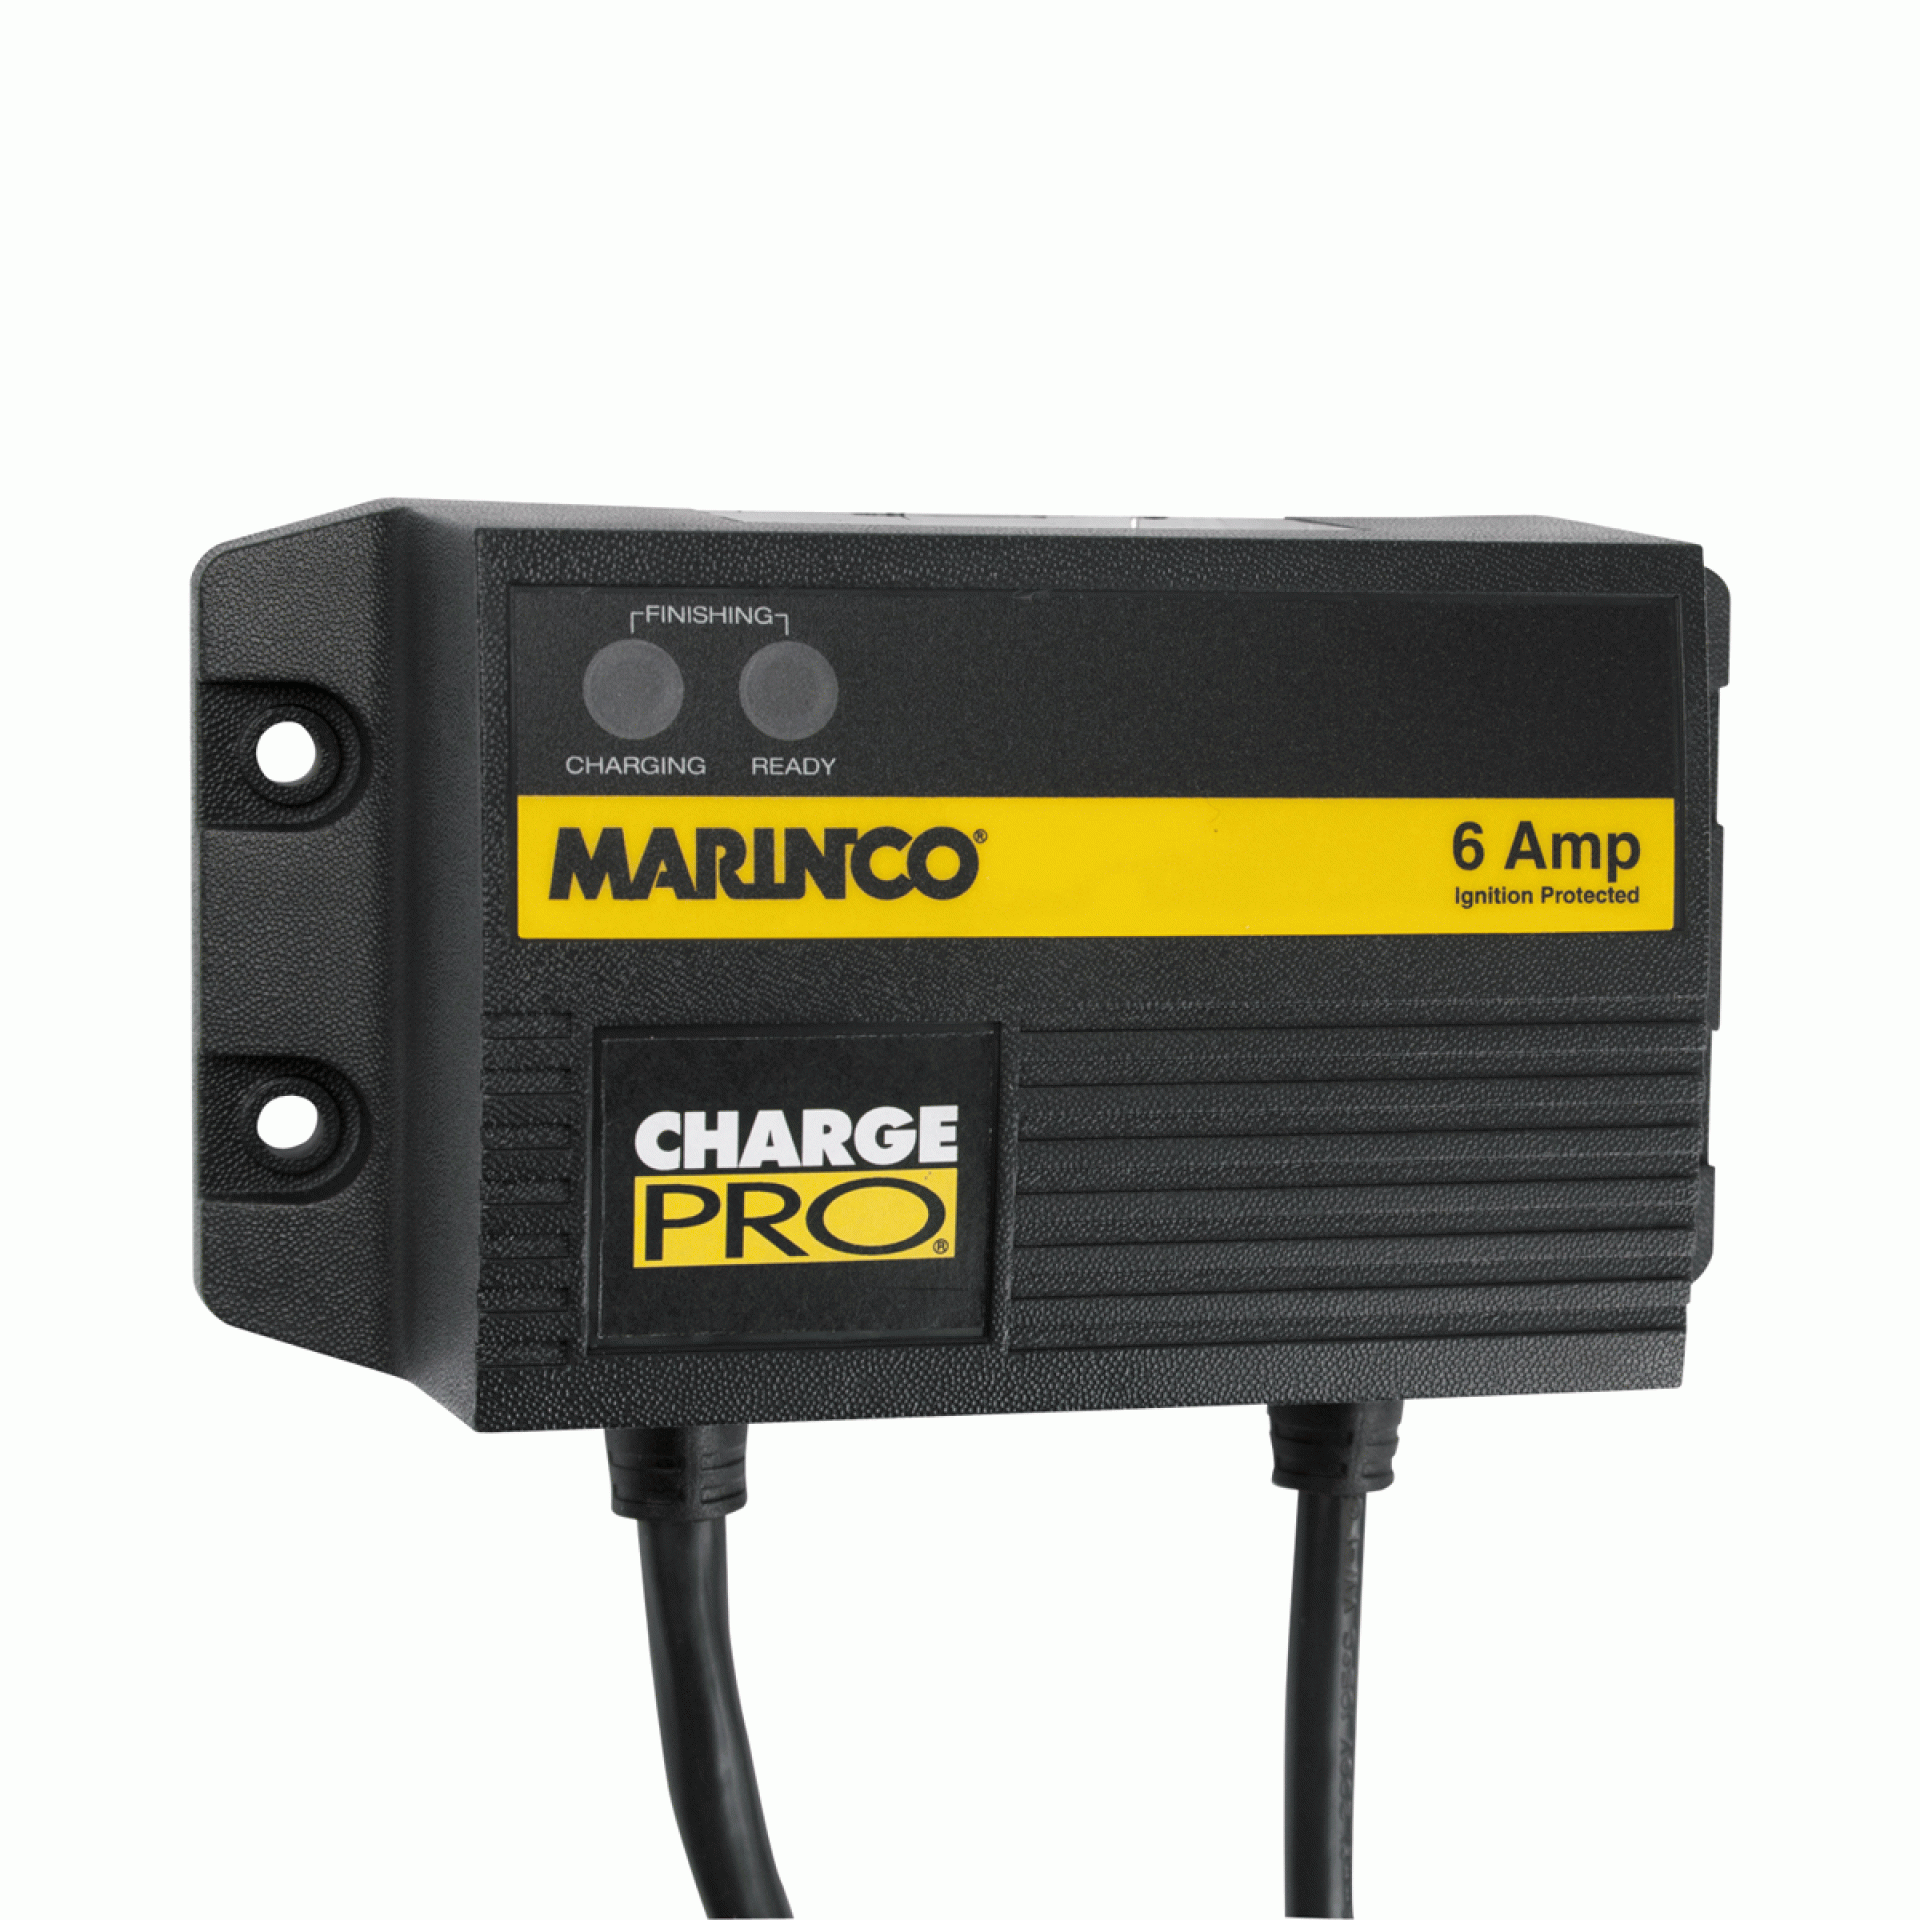 MARINCO | 28106 | CHARGE PRO BATTERY ONBOARD CHARGER 6 AMP 1 OUTPUT 12V